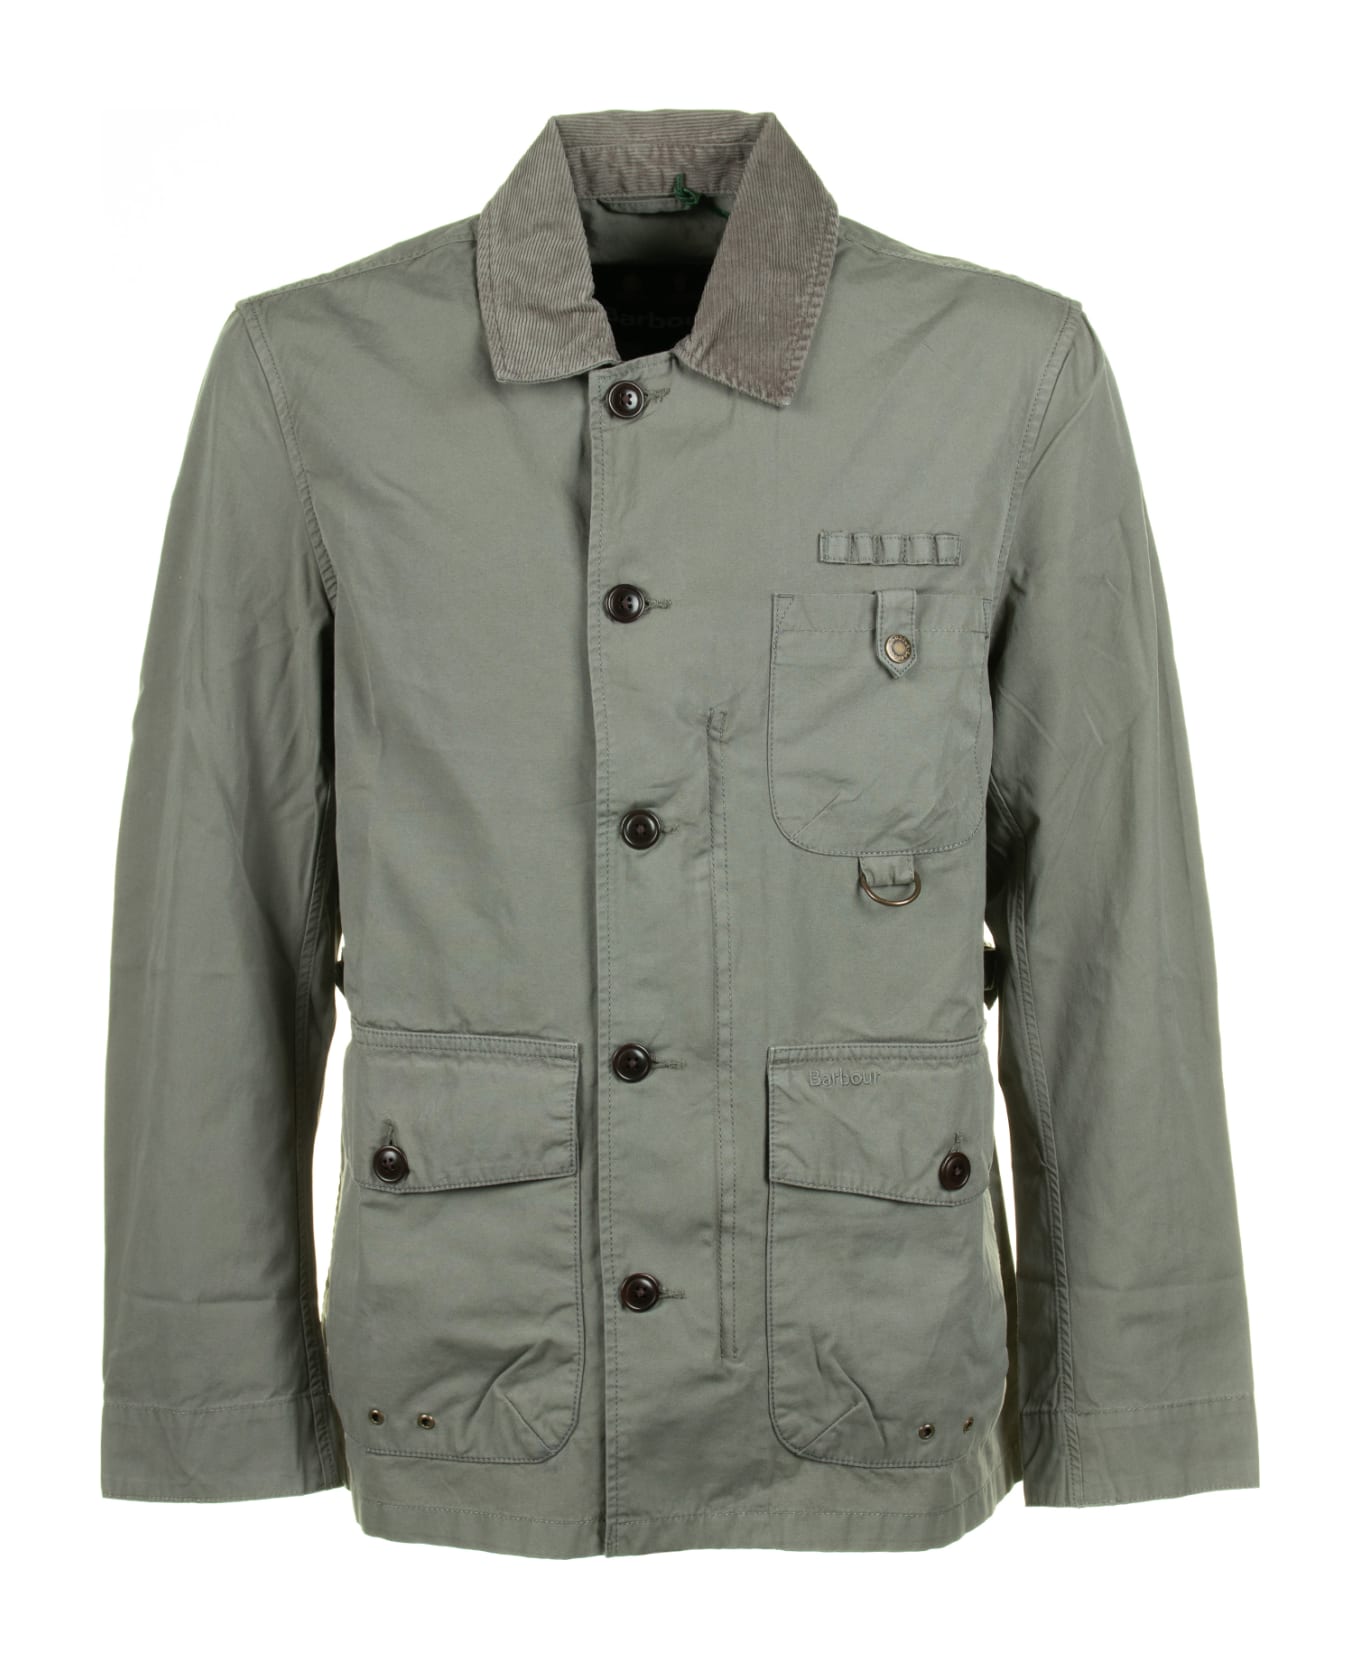 Barbour Cotton Jacket With Pockets And Buttons - AGAVE